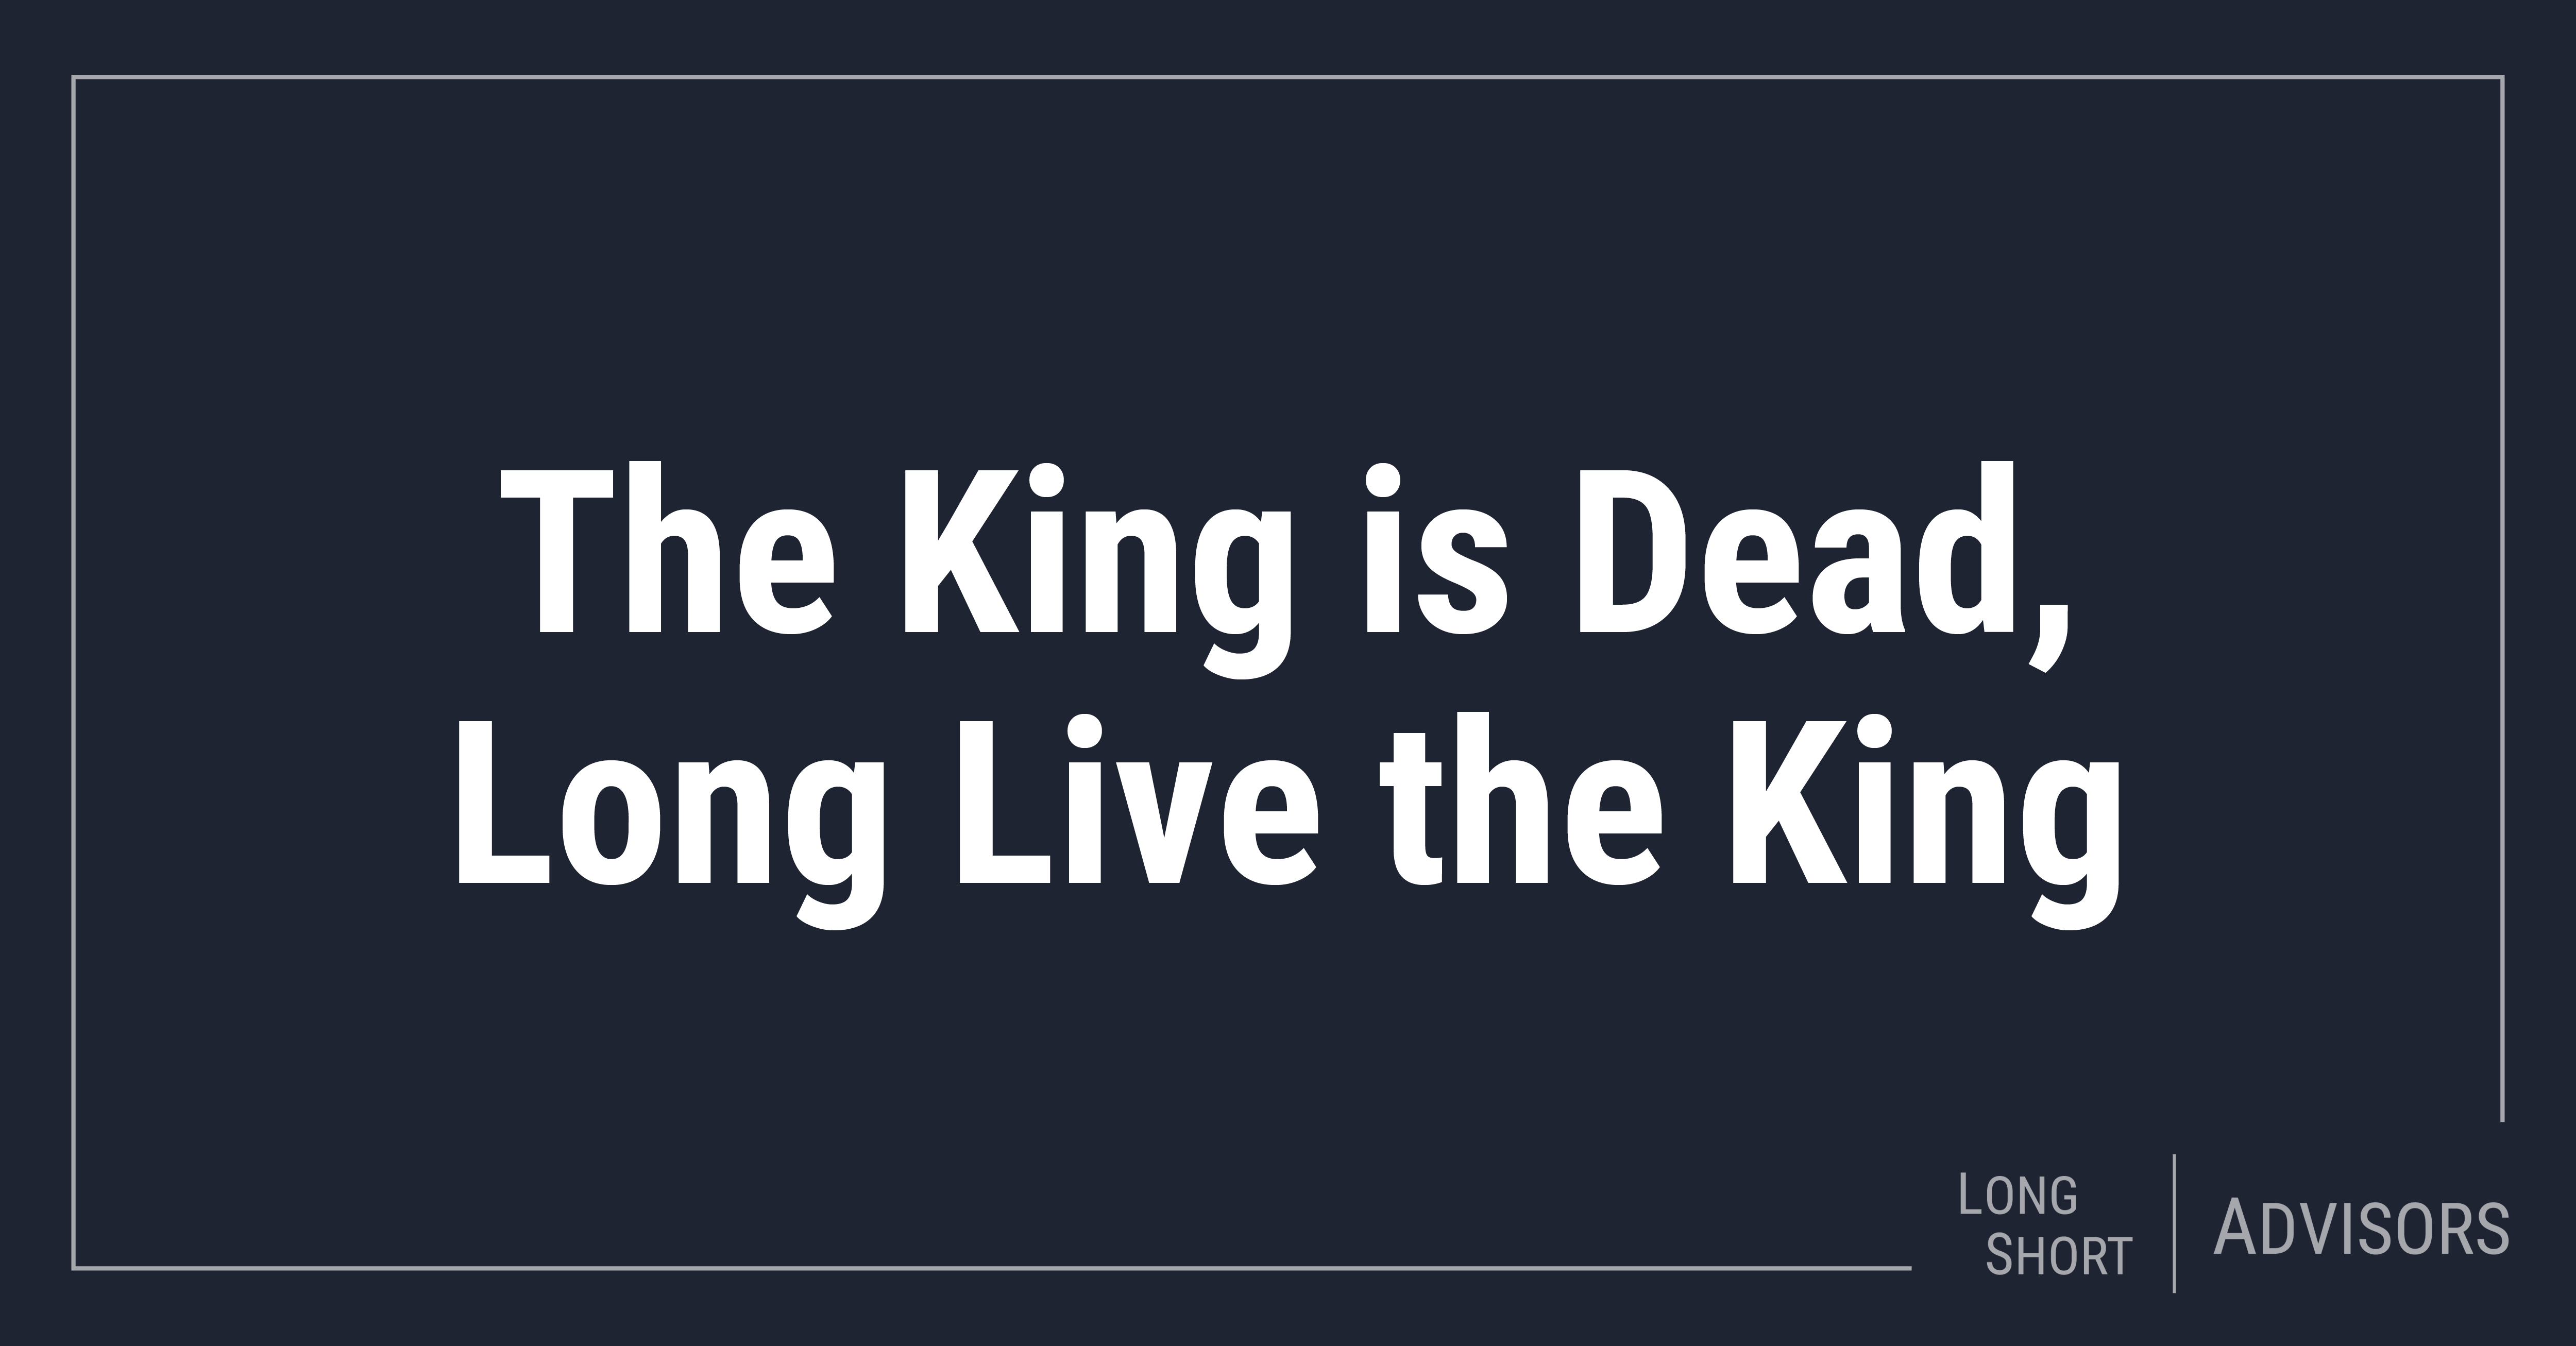 The King is Dead, Long Live the King